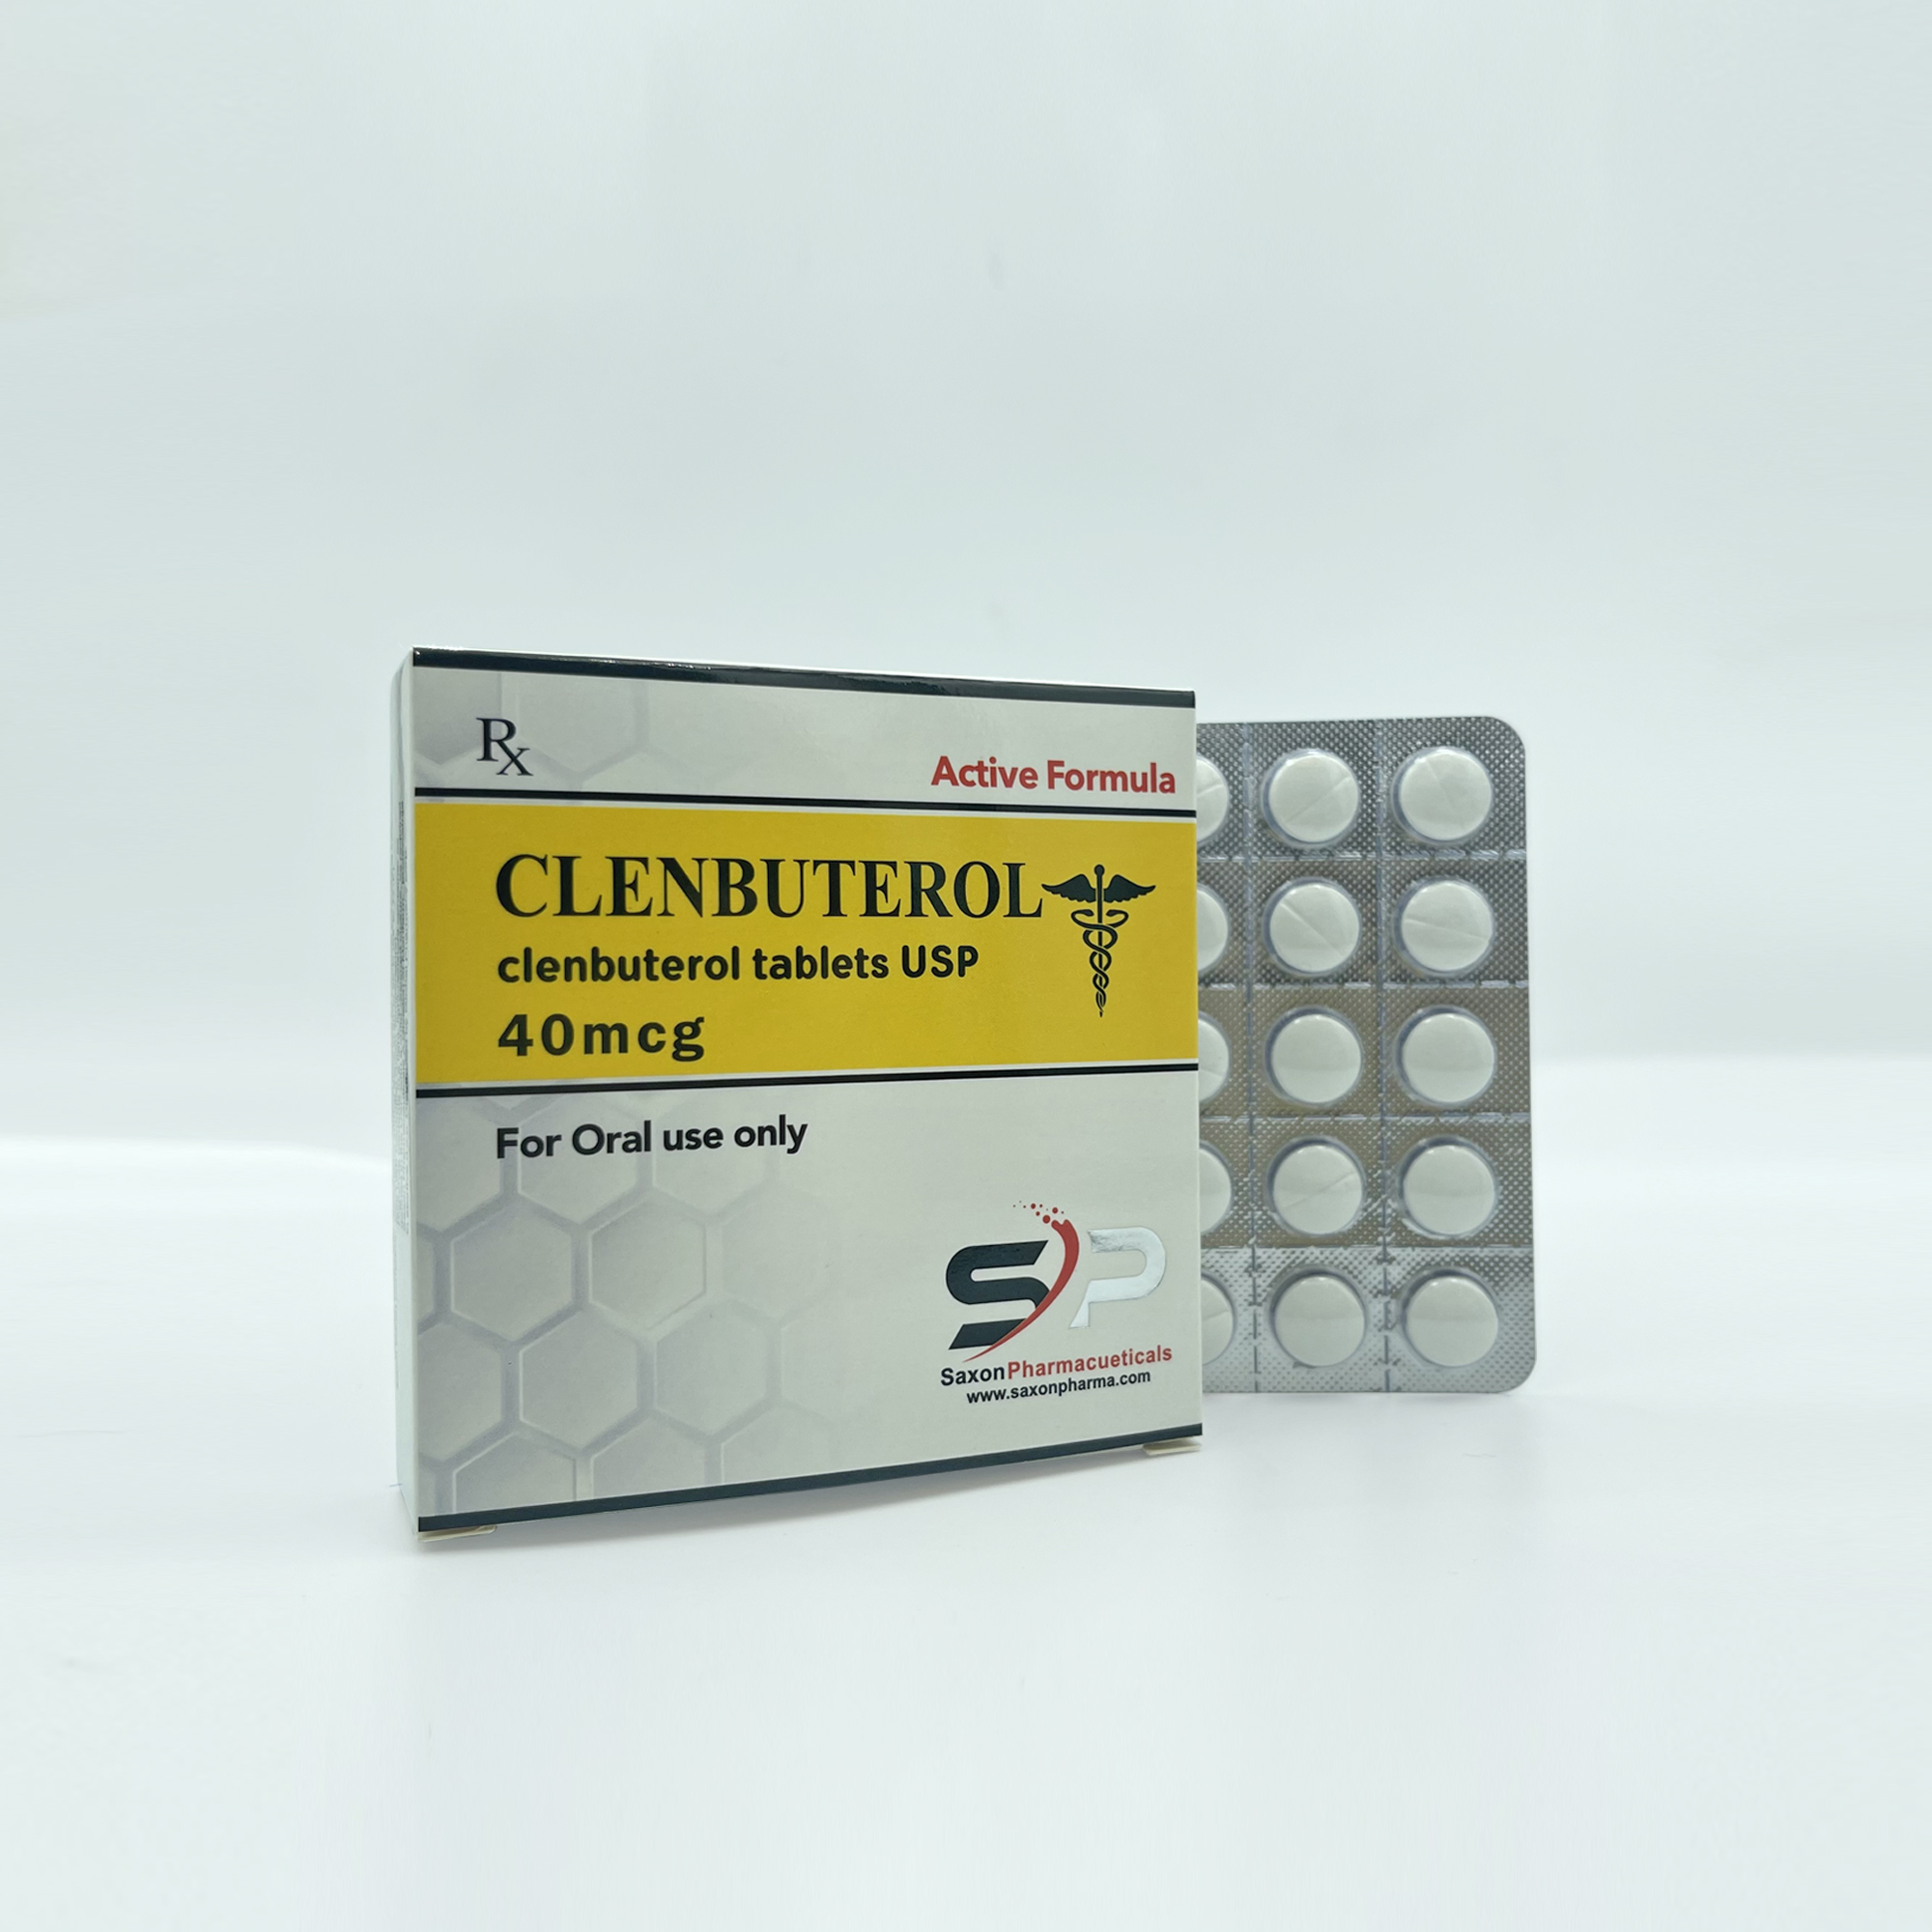 Clenbuterol dosage for women is pretty much the same as it is for men because of the way it works. Although many people consider it to be an anabolic steroid, it’s actually not. It will not interfere with your hormones in any way, and that’s why Clenbuterol dosage for women is the same as it is for men.